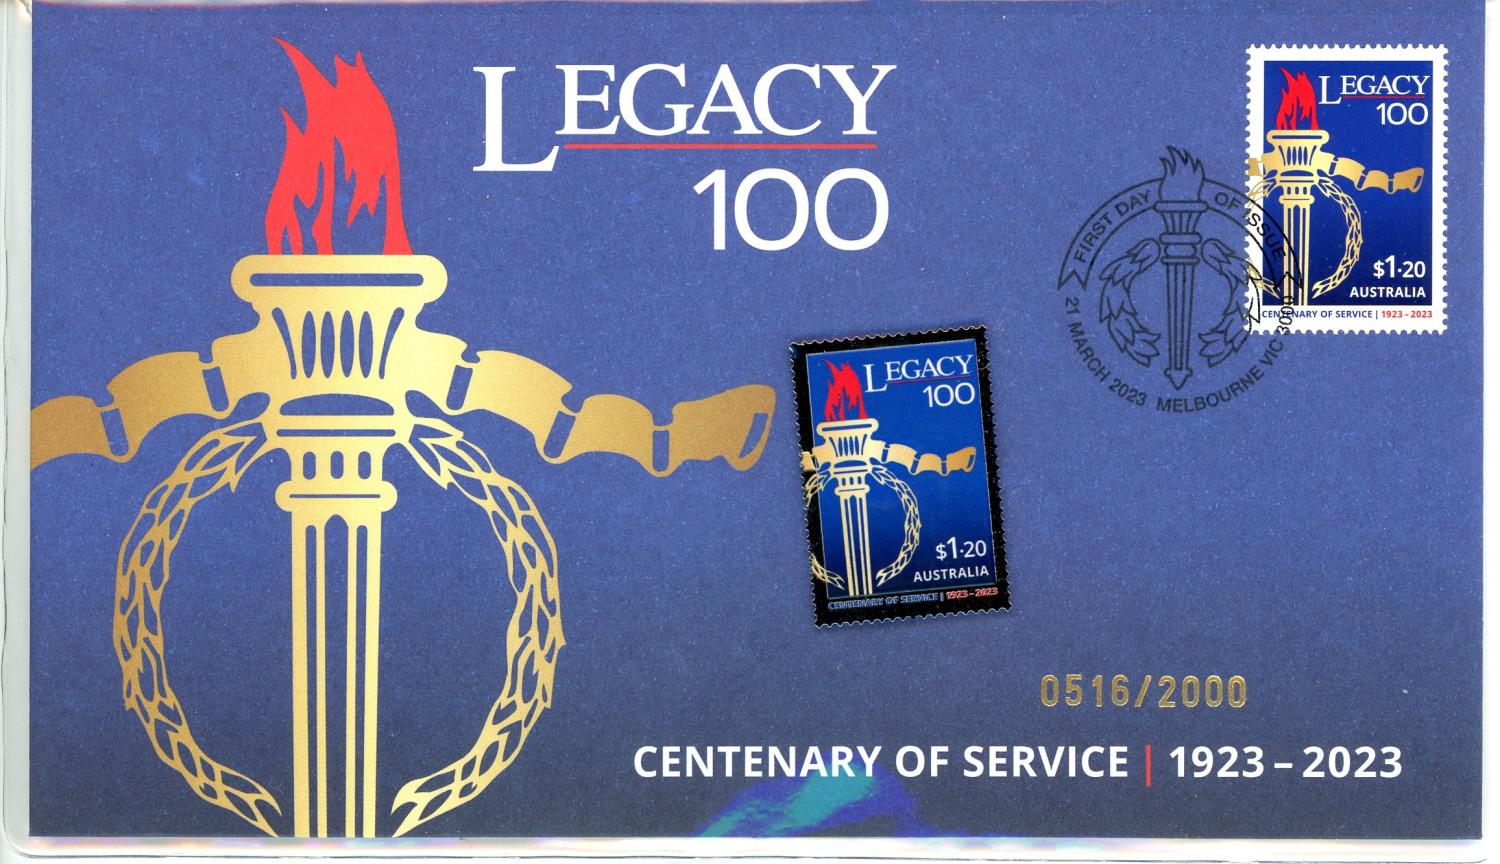 Thumbnail for 2023 Legacy 100 Centenary of Service 1923 - 2023 Prestige Stamp Magnetic Badge Postal  Cover